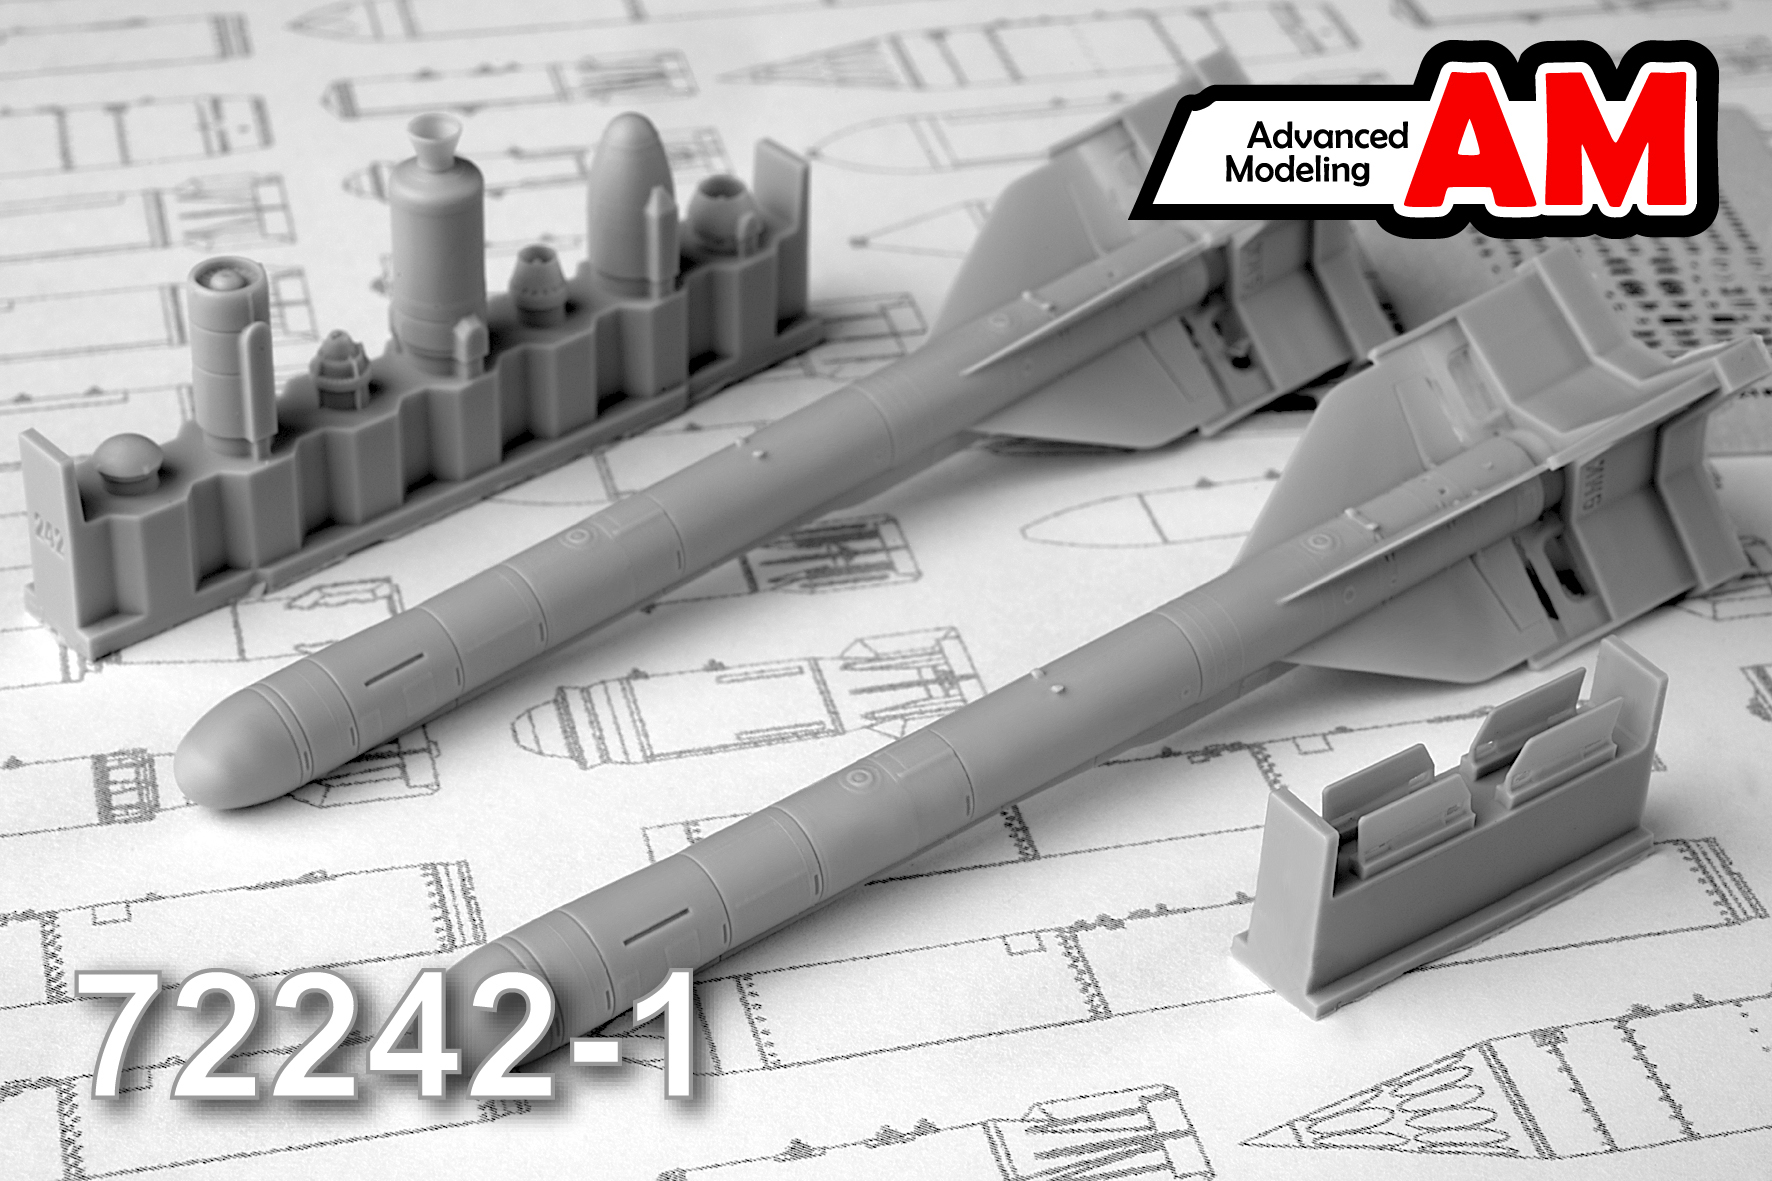 Additions (3D resin printing) 1/72 Aircraft guided missile Kh-58MK with launcher AKU-58 (Advanced Modeling) 